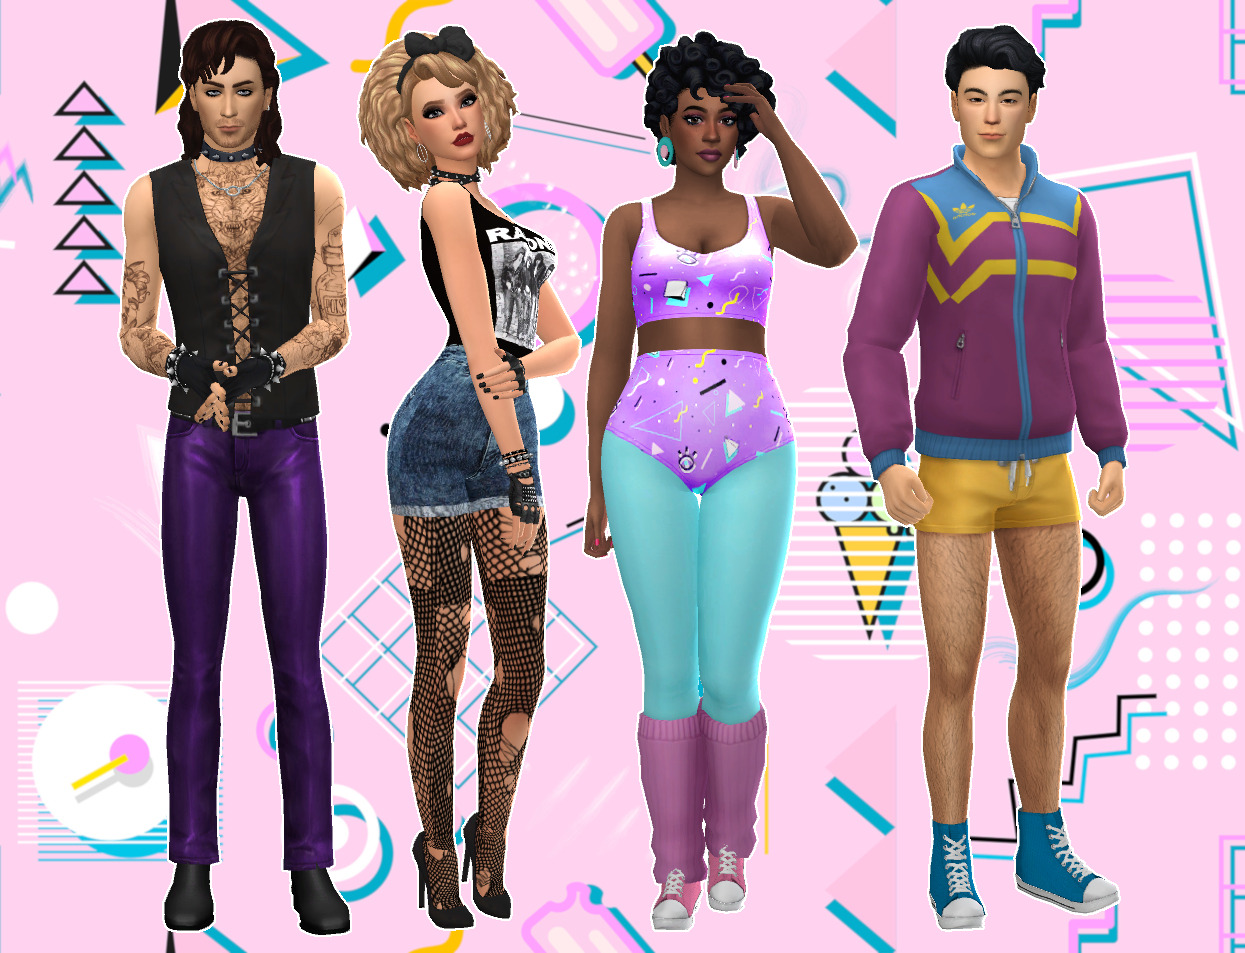 Weekend мод симс. The SIMS 4 80s stuff. SIMS 4 outfit. Симс 4 стиль 80. SIMS 3 80s.